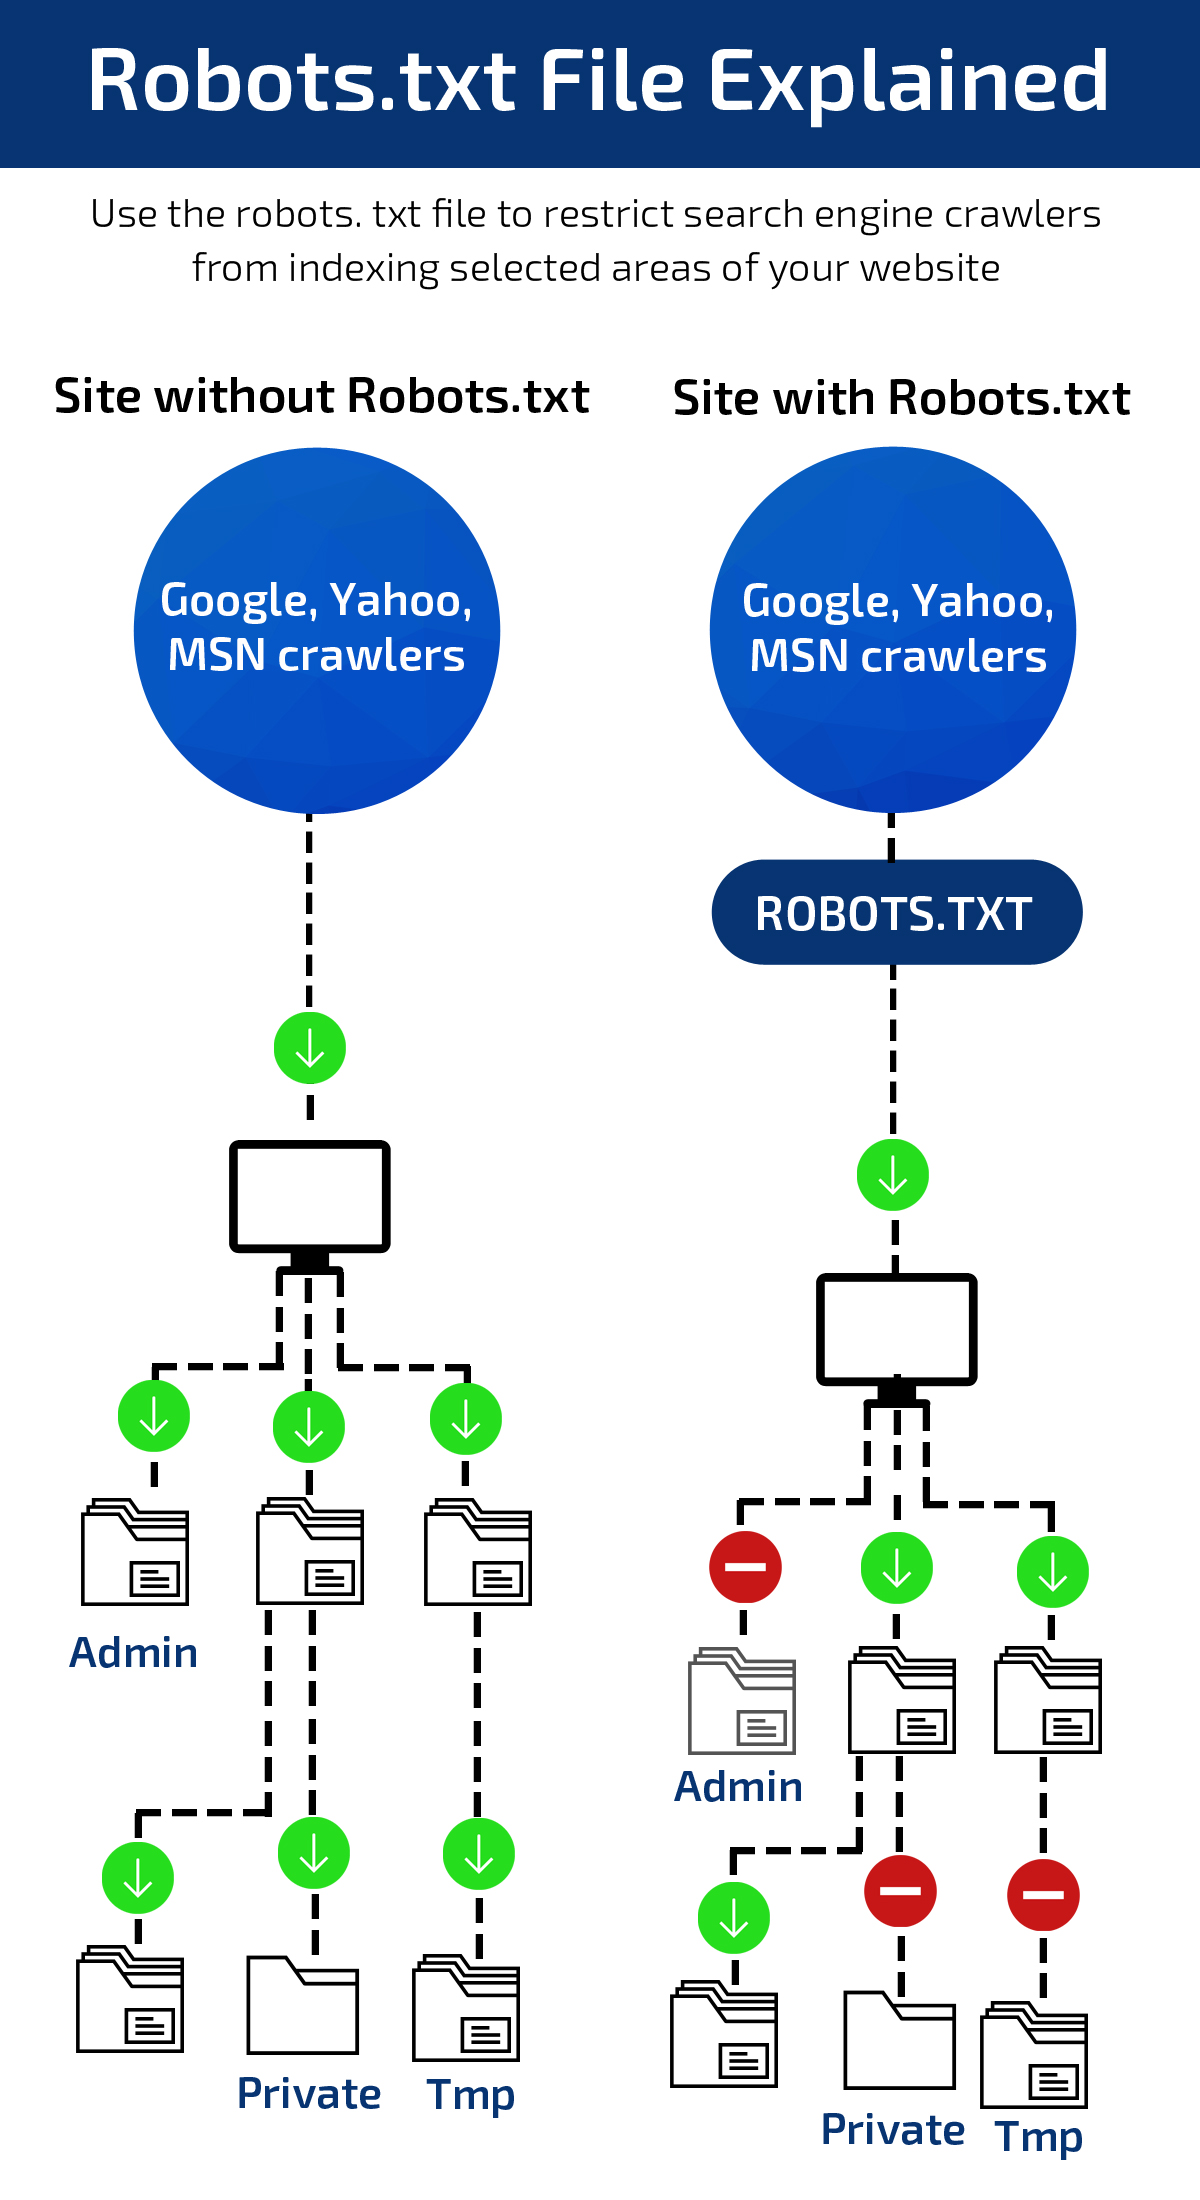 What is Robots.txt